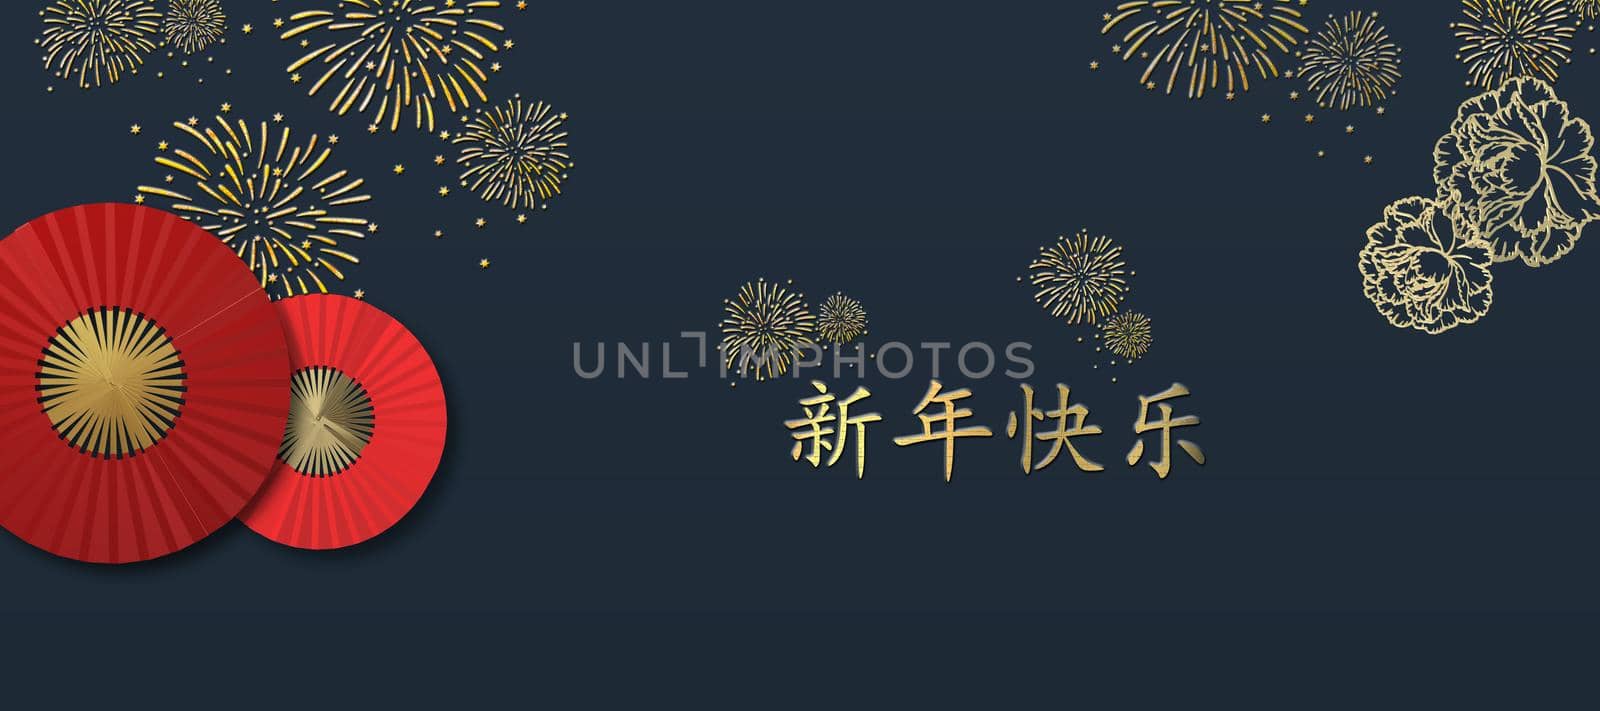 Happy New Year card. Happy Chinese new year golden text in Chinese. Design for greetings card, invitation, posters, brochure, calendar, flyers, banners. 3D illustration